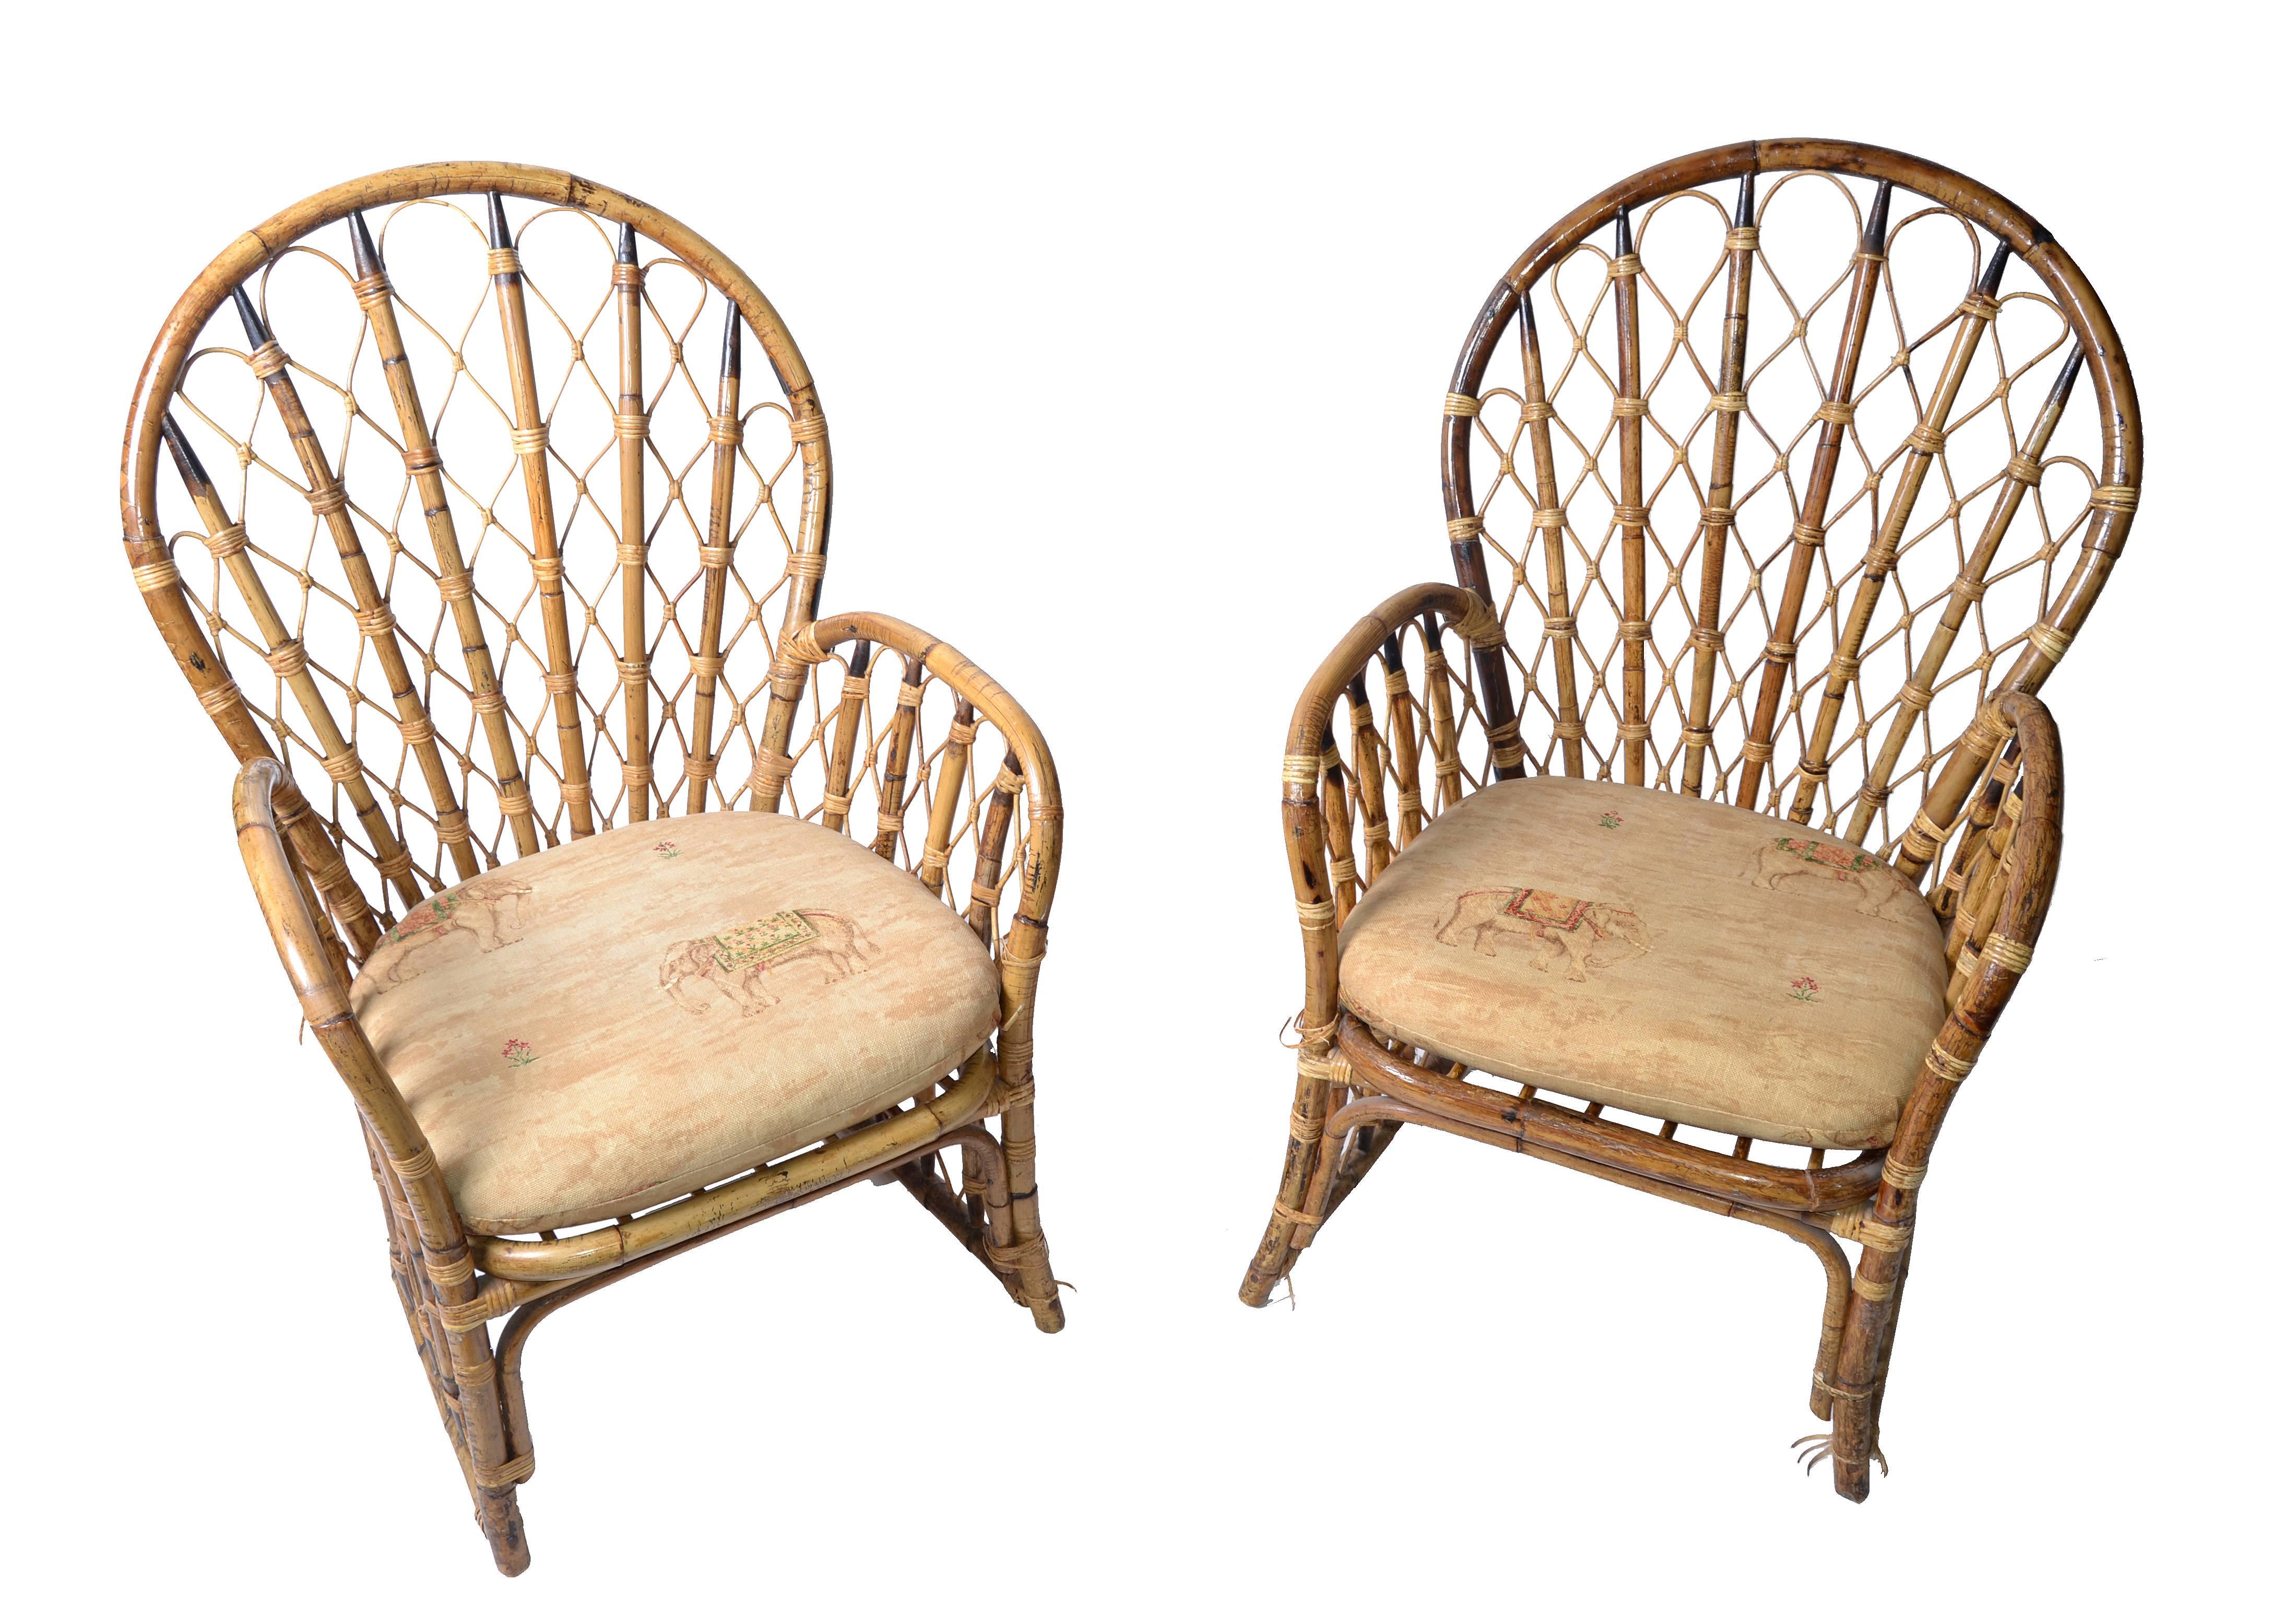 Set of two vintage rattan, wicker and bamboo dining chairs for your Pavilion.
Chinese inspired bamboo patterns.
Handcrafted and made in the Philippines.
They have each a seat cushion.
Labelled on one chair.
Measures: Arm height: 24.5